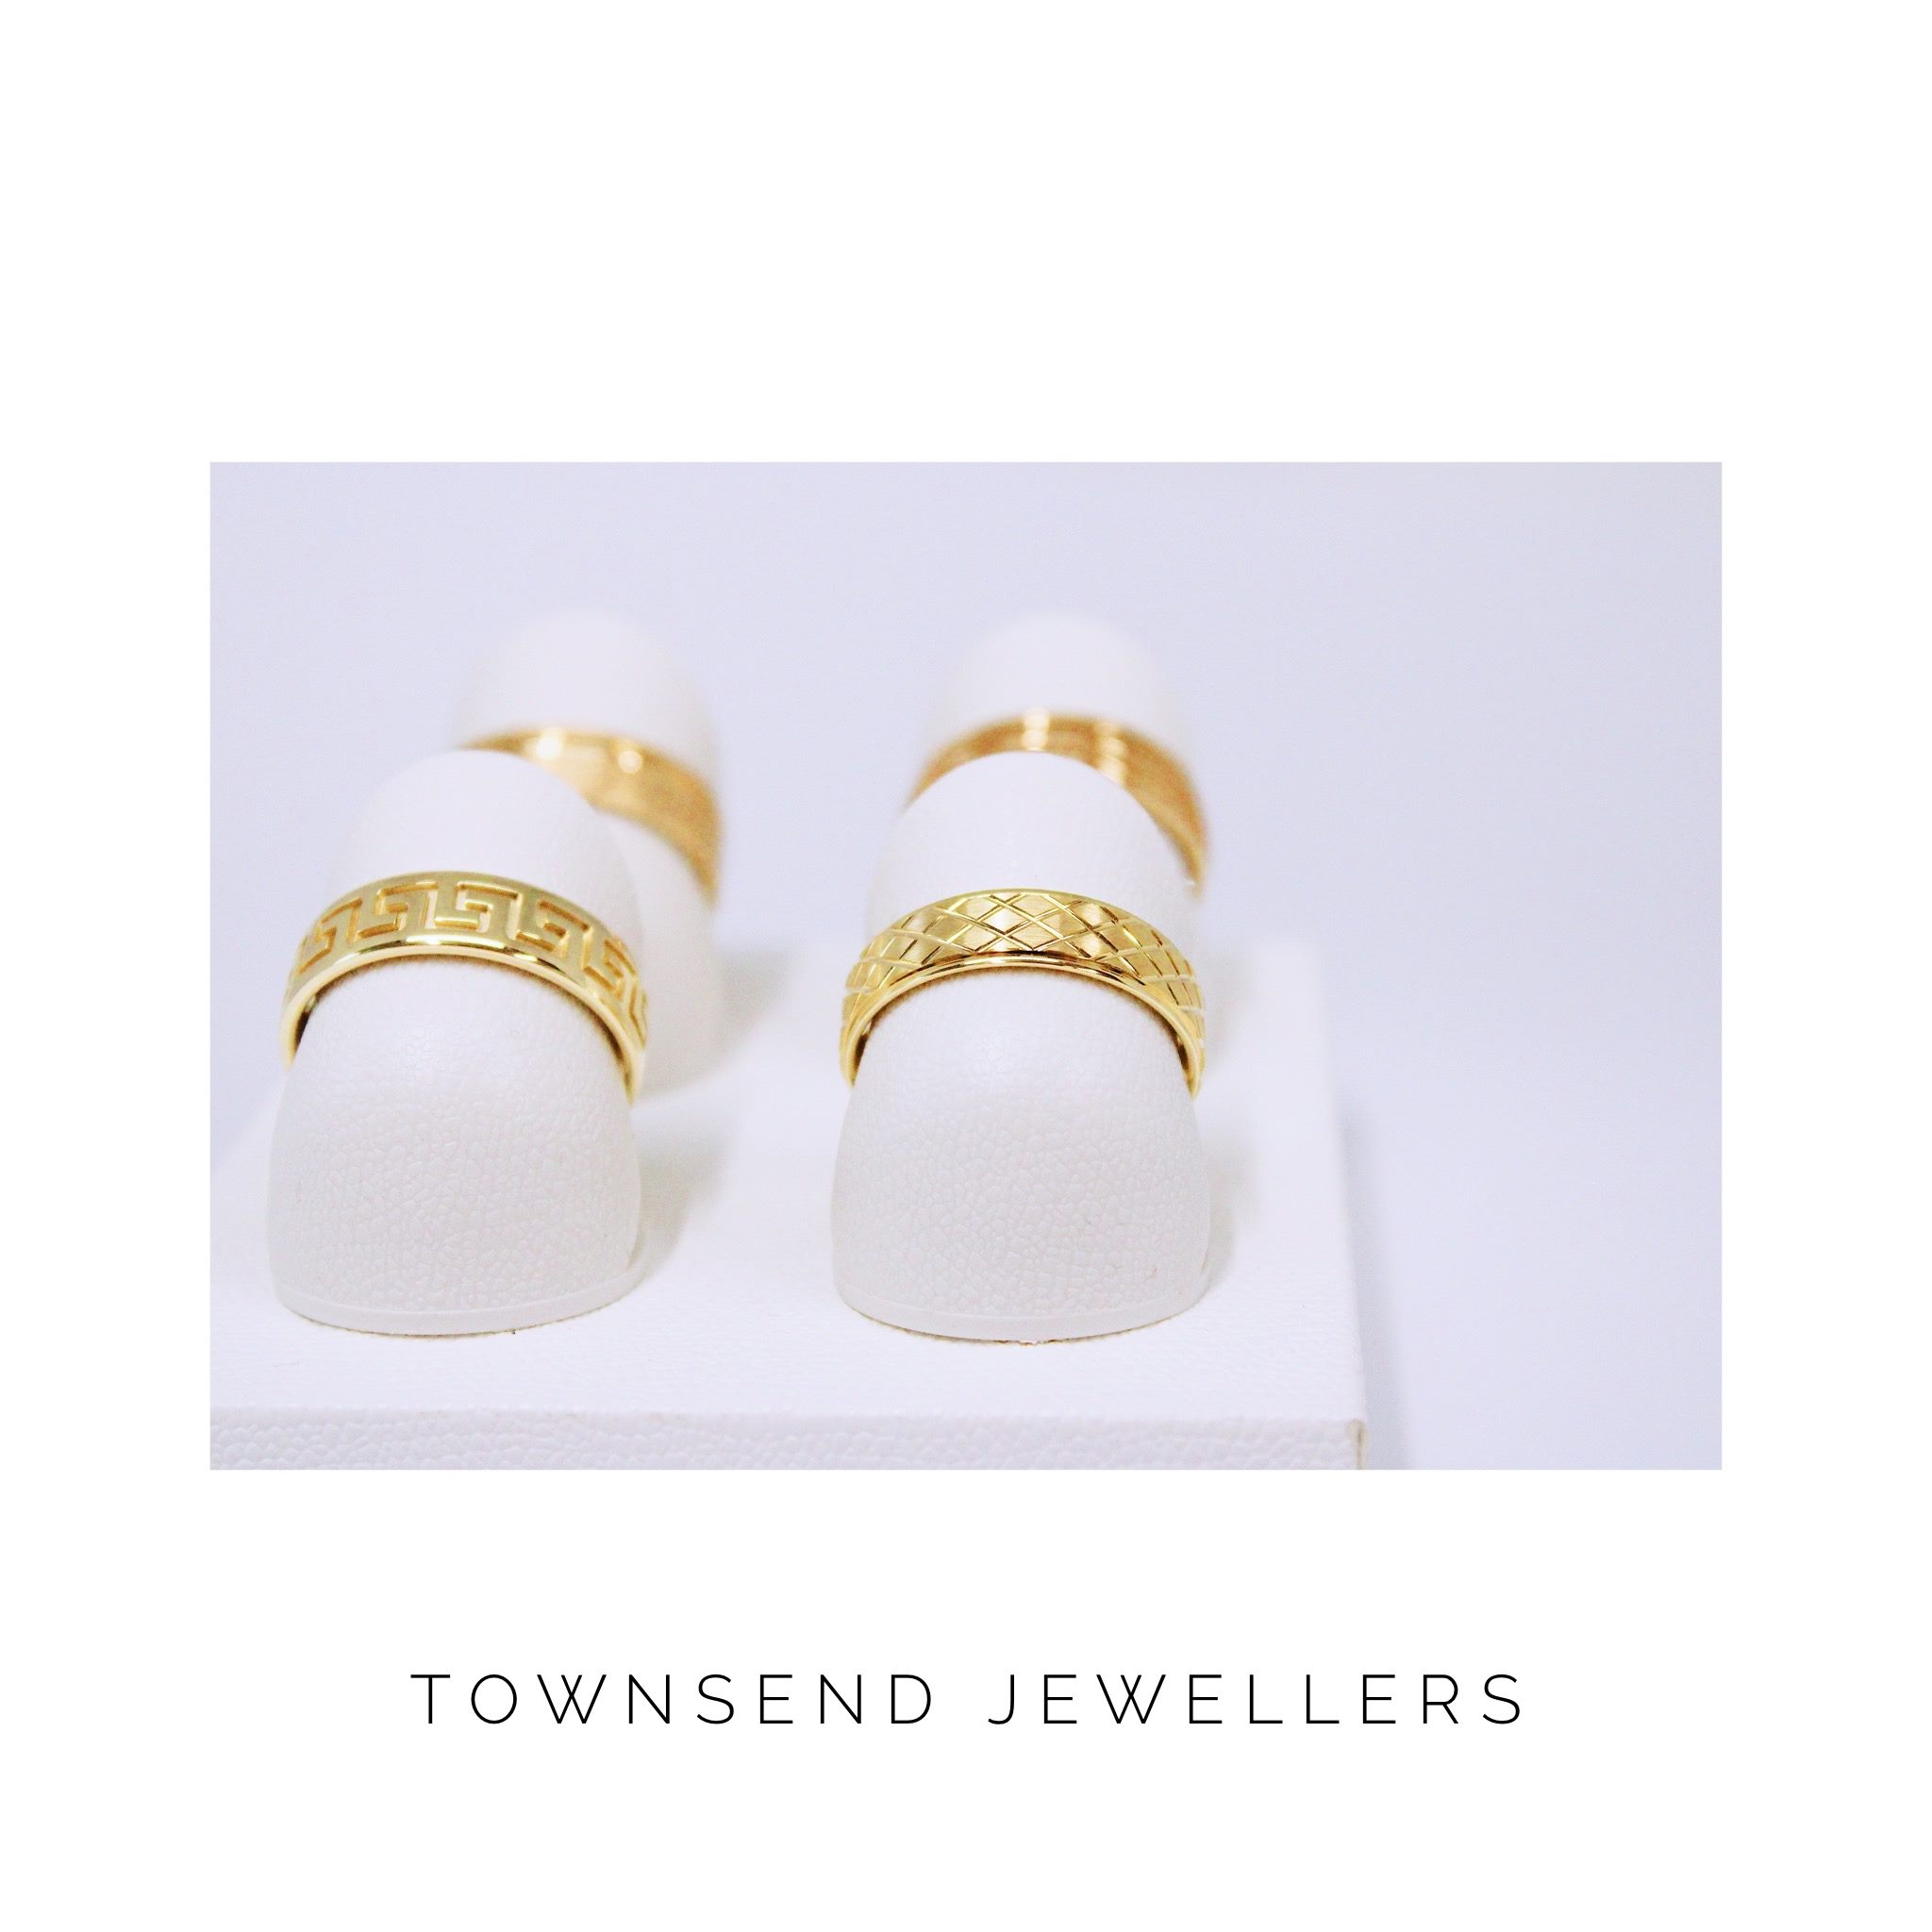 Townsend Jewellers